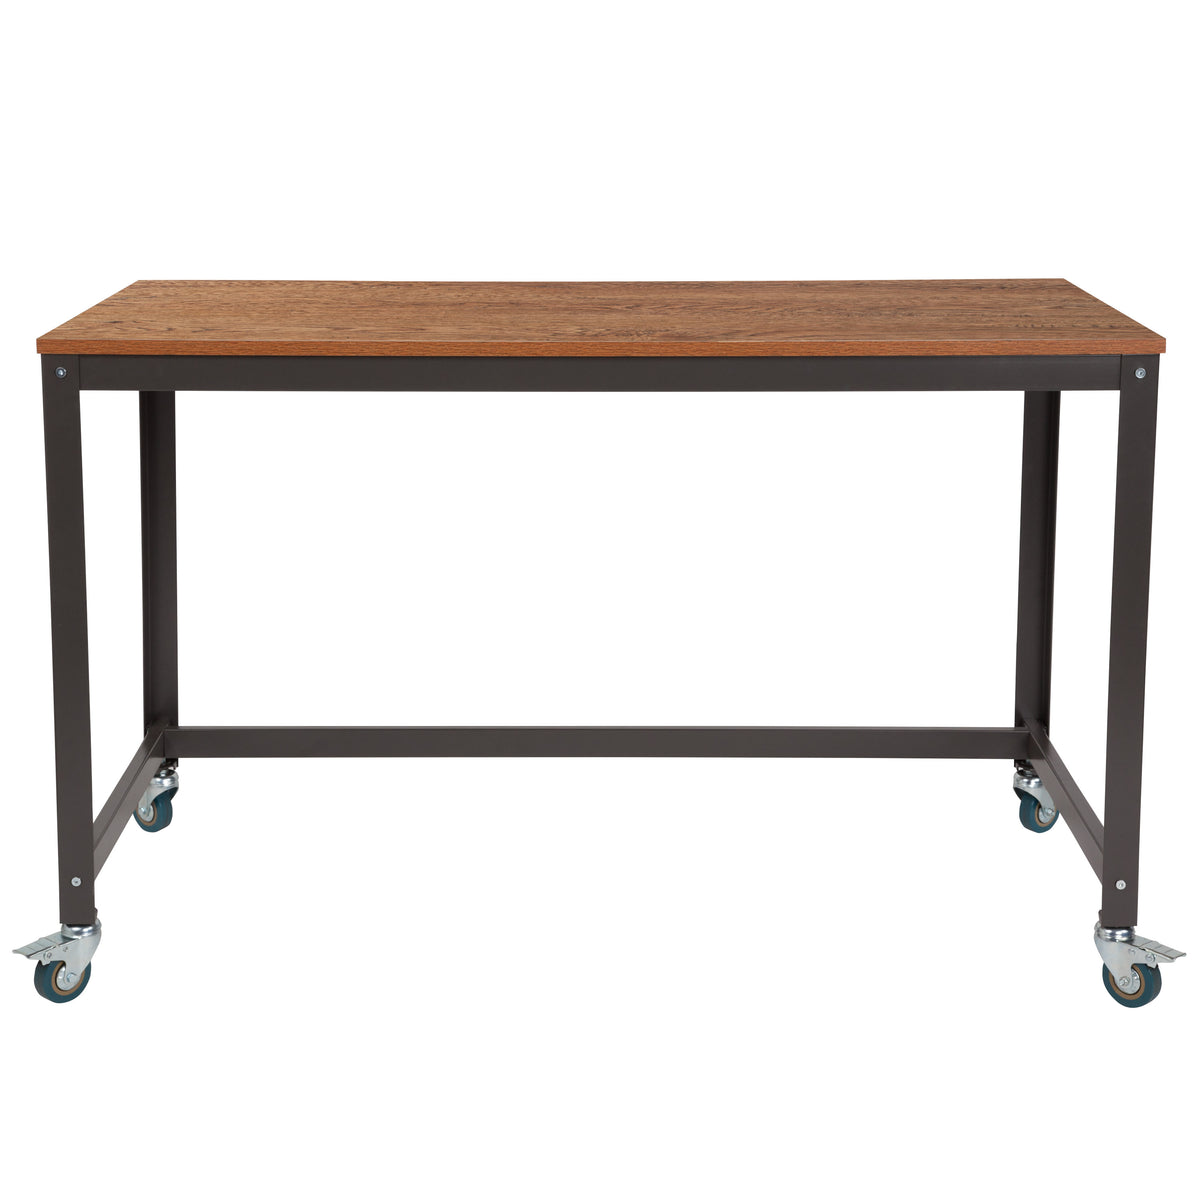 Computer Table and Desk in Brown Oak Wood Grain Finish with Metal Wheels